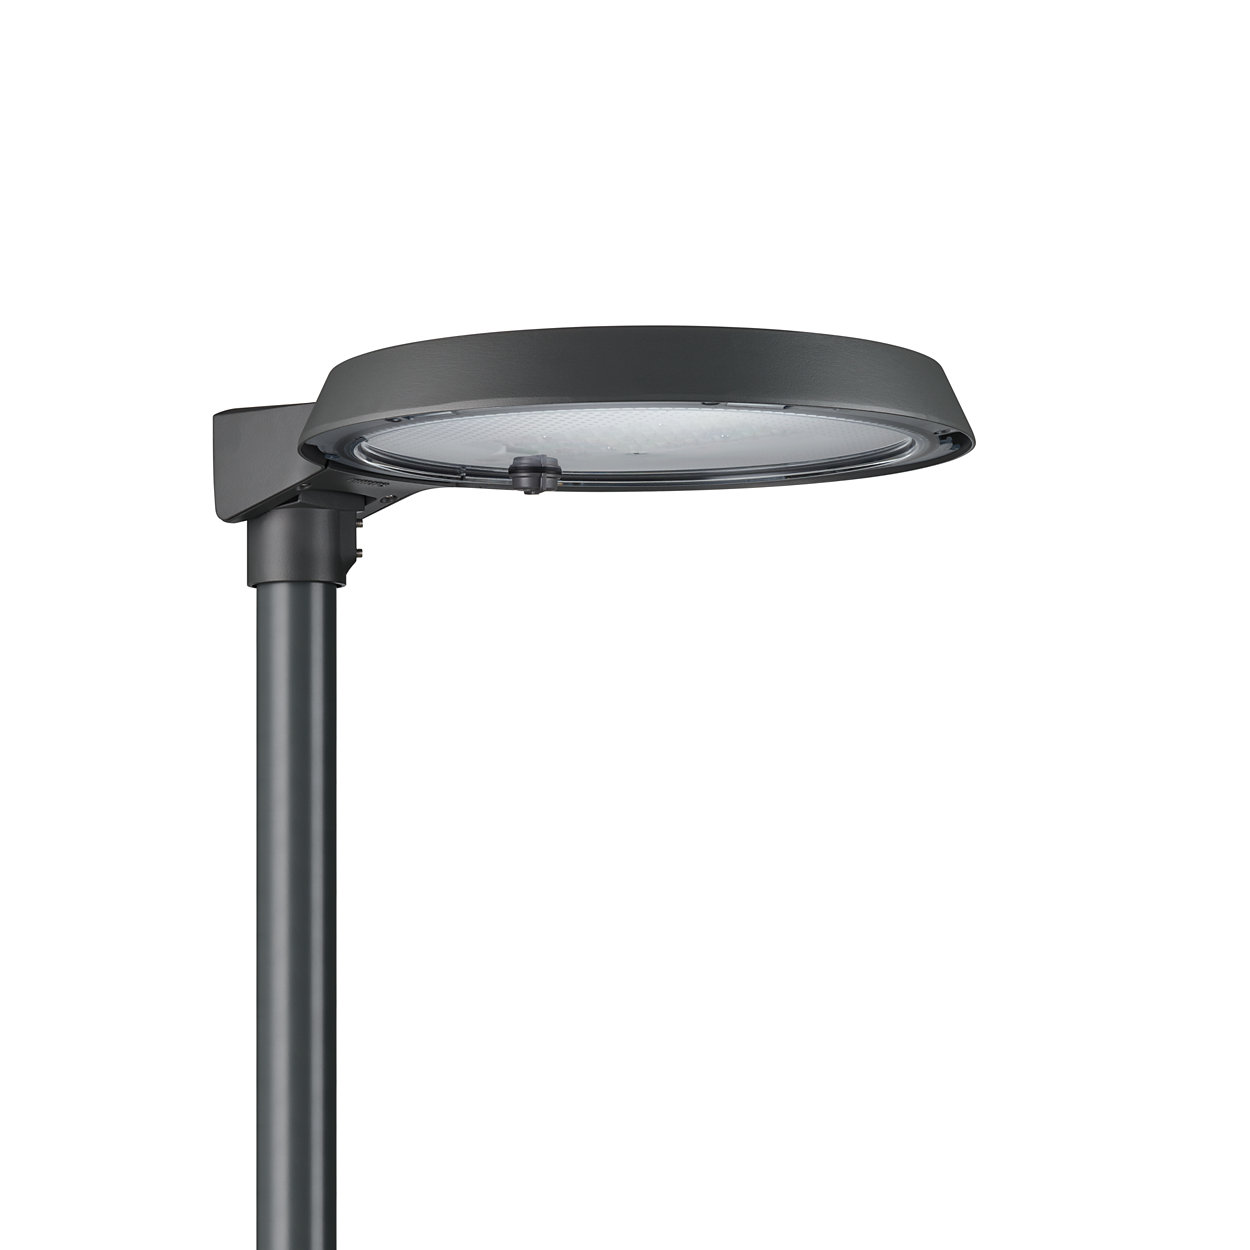 Philips TownTune Asymmetric – Extending the home feel onto the street